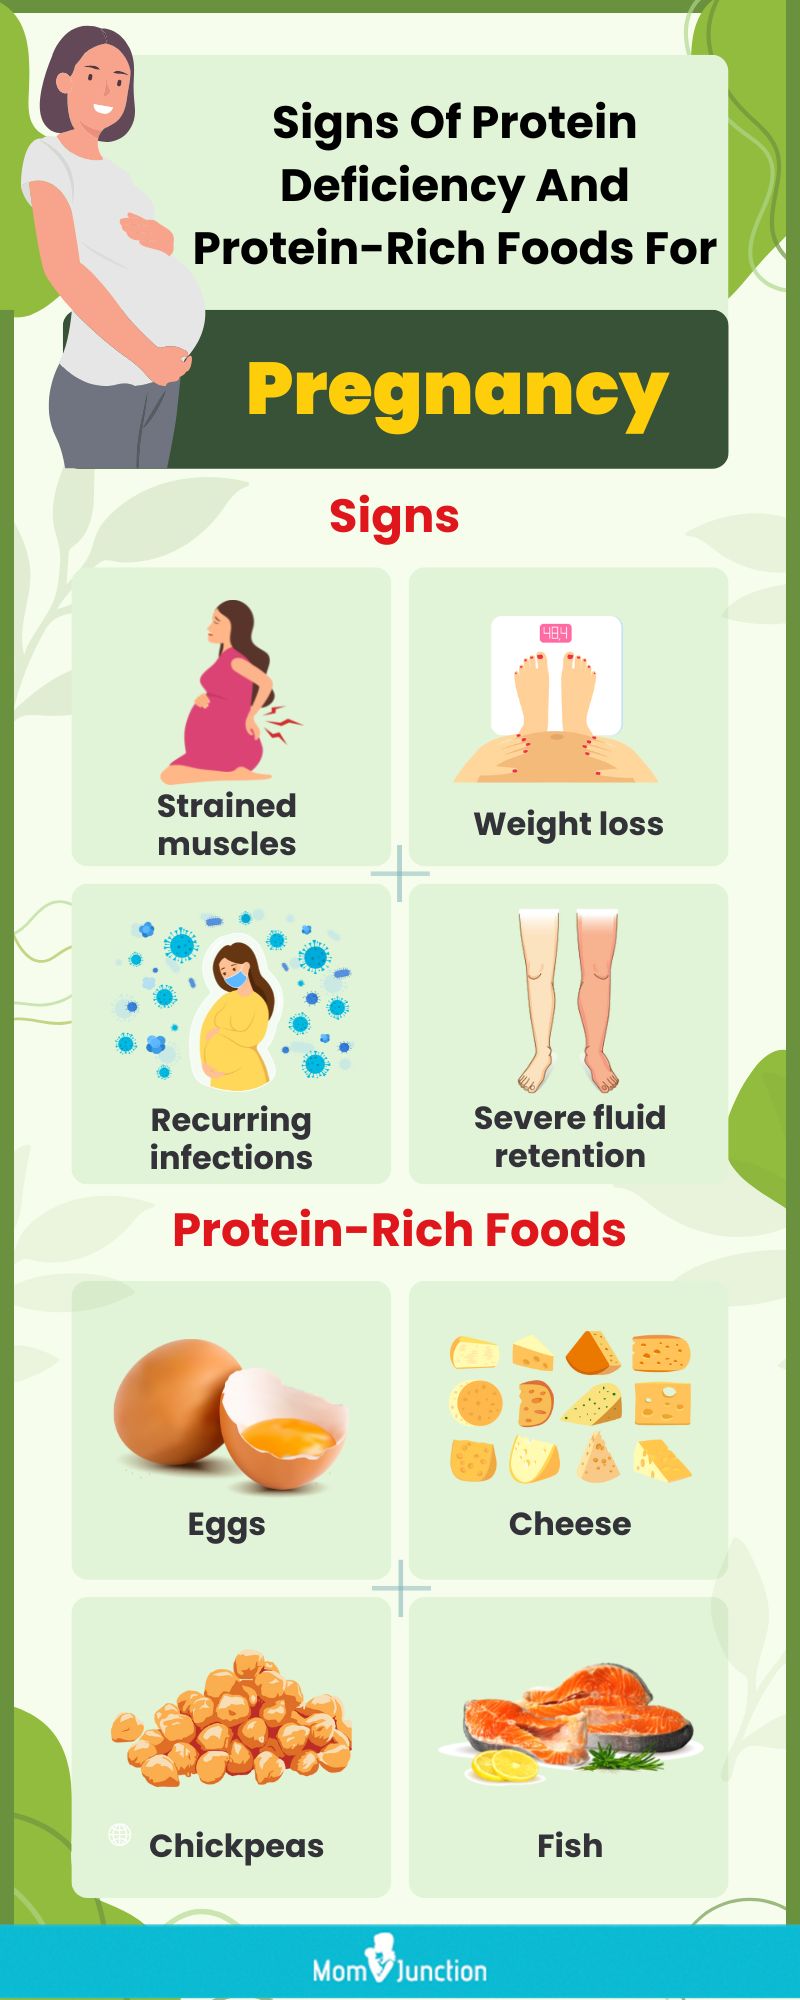 signs of protein deficiency and protein rich foods for pregnancy (infographic)